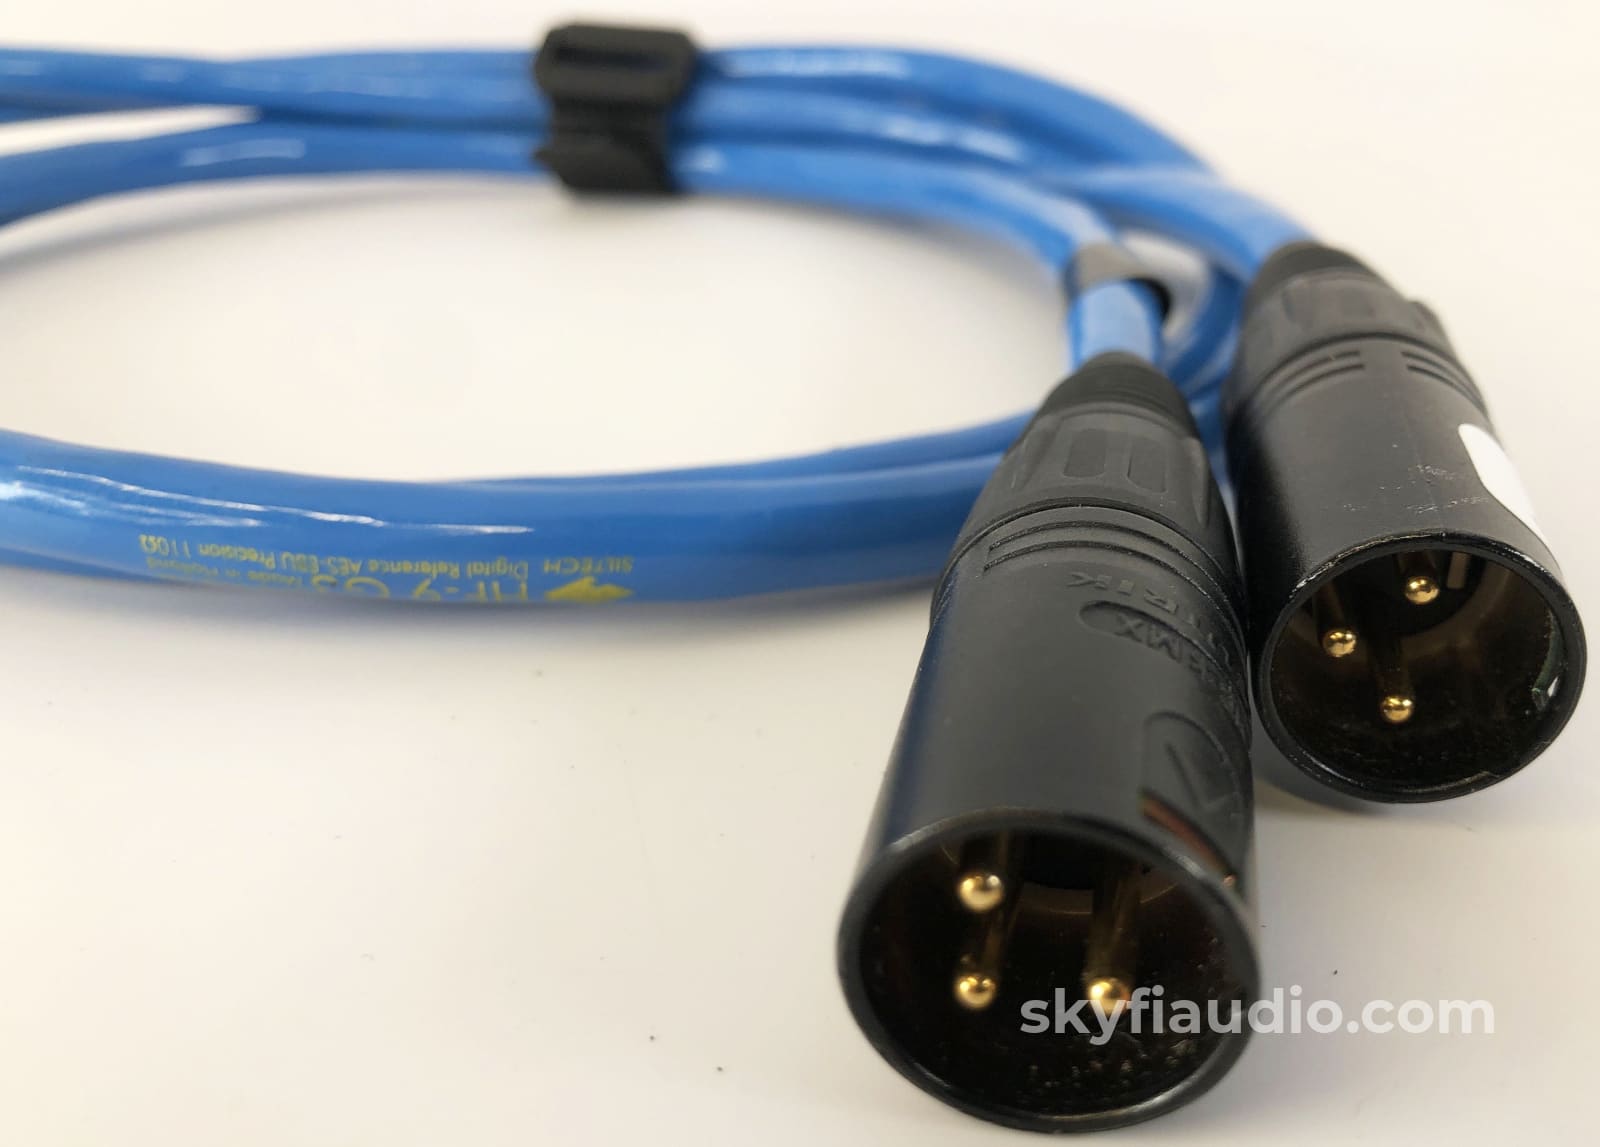 Siltech Cables - Hf-9 G3 Series- Digital Audio Aes/Ebu (Xlr Connector) Cable 1M